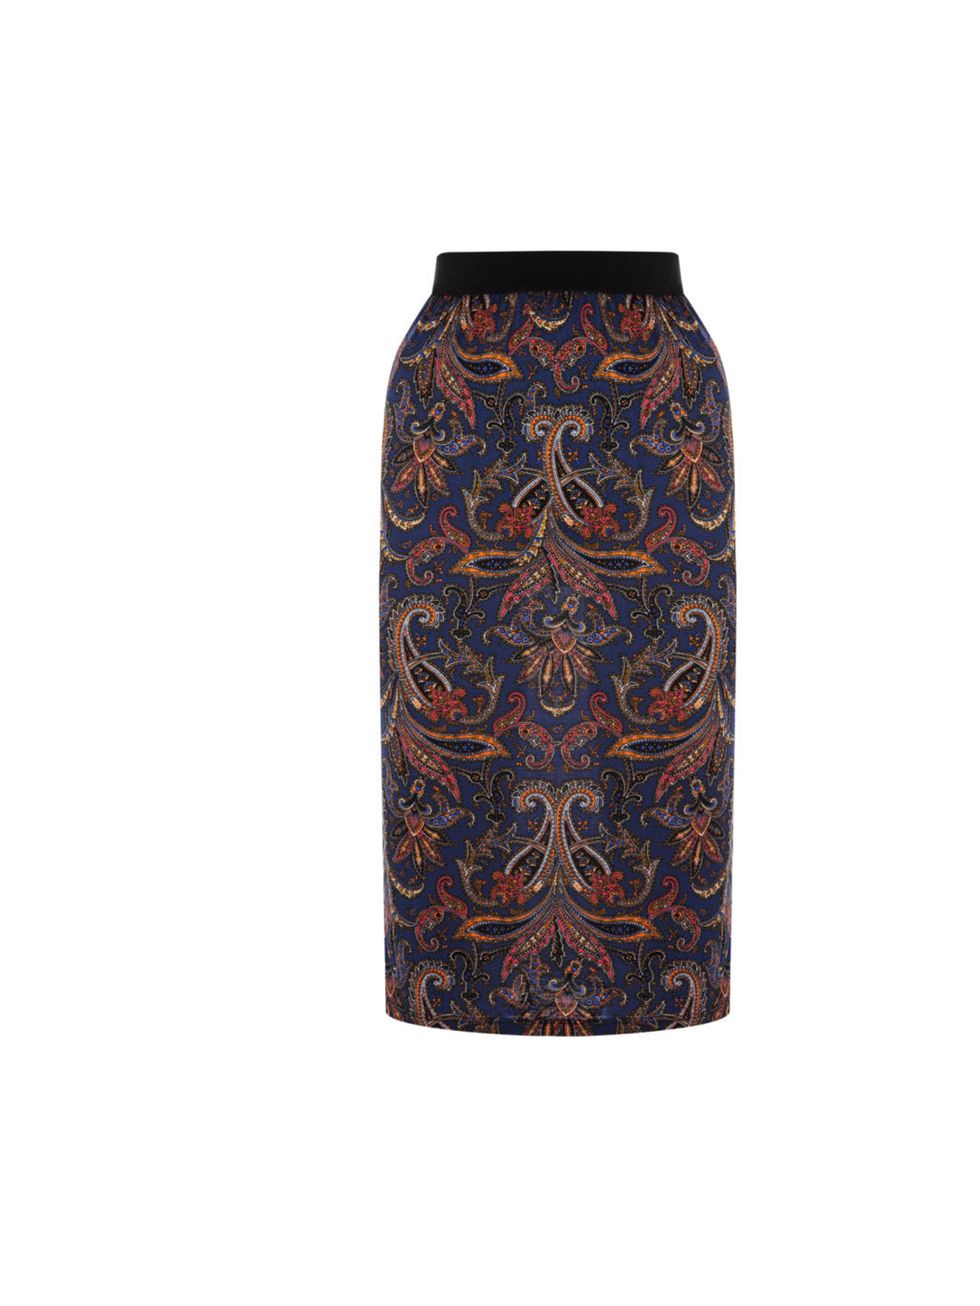 <p>Warehouse paisley print pencil skirt, £25</p><p><a href="http://shopping.elleuk.com/browse?fts=warehouse+paisley+skirt">BUY NOW</a></p>